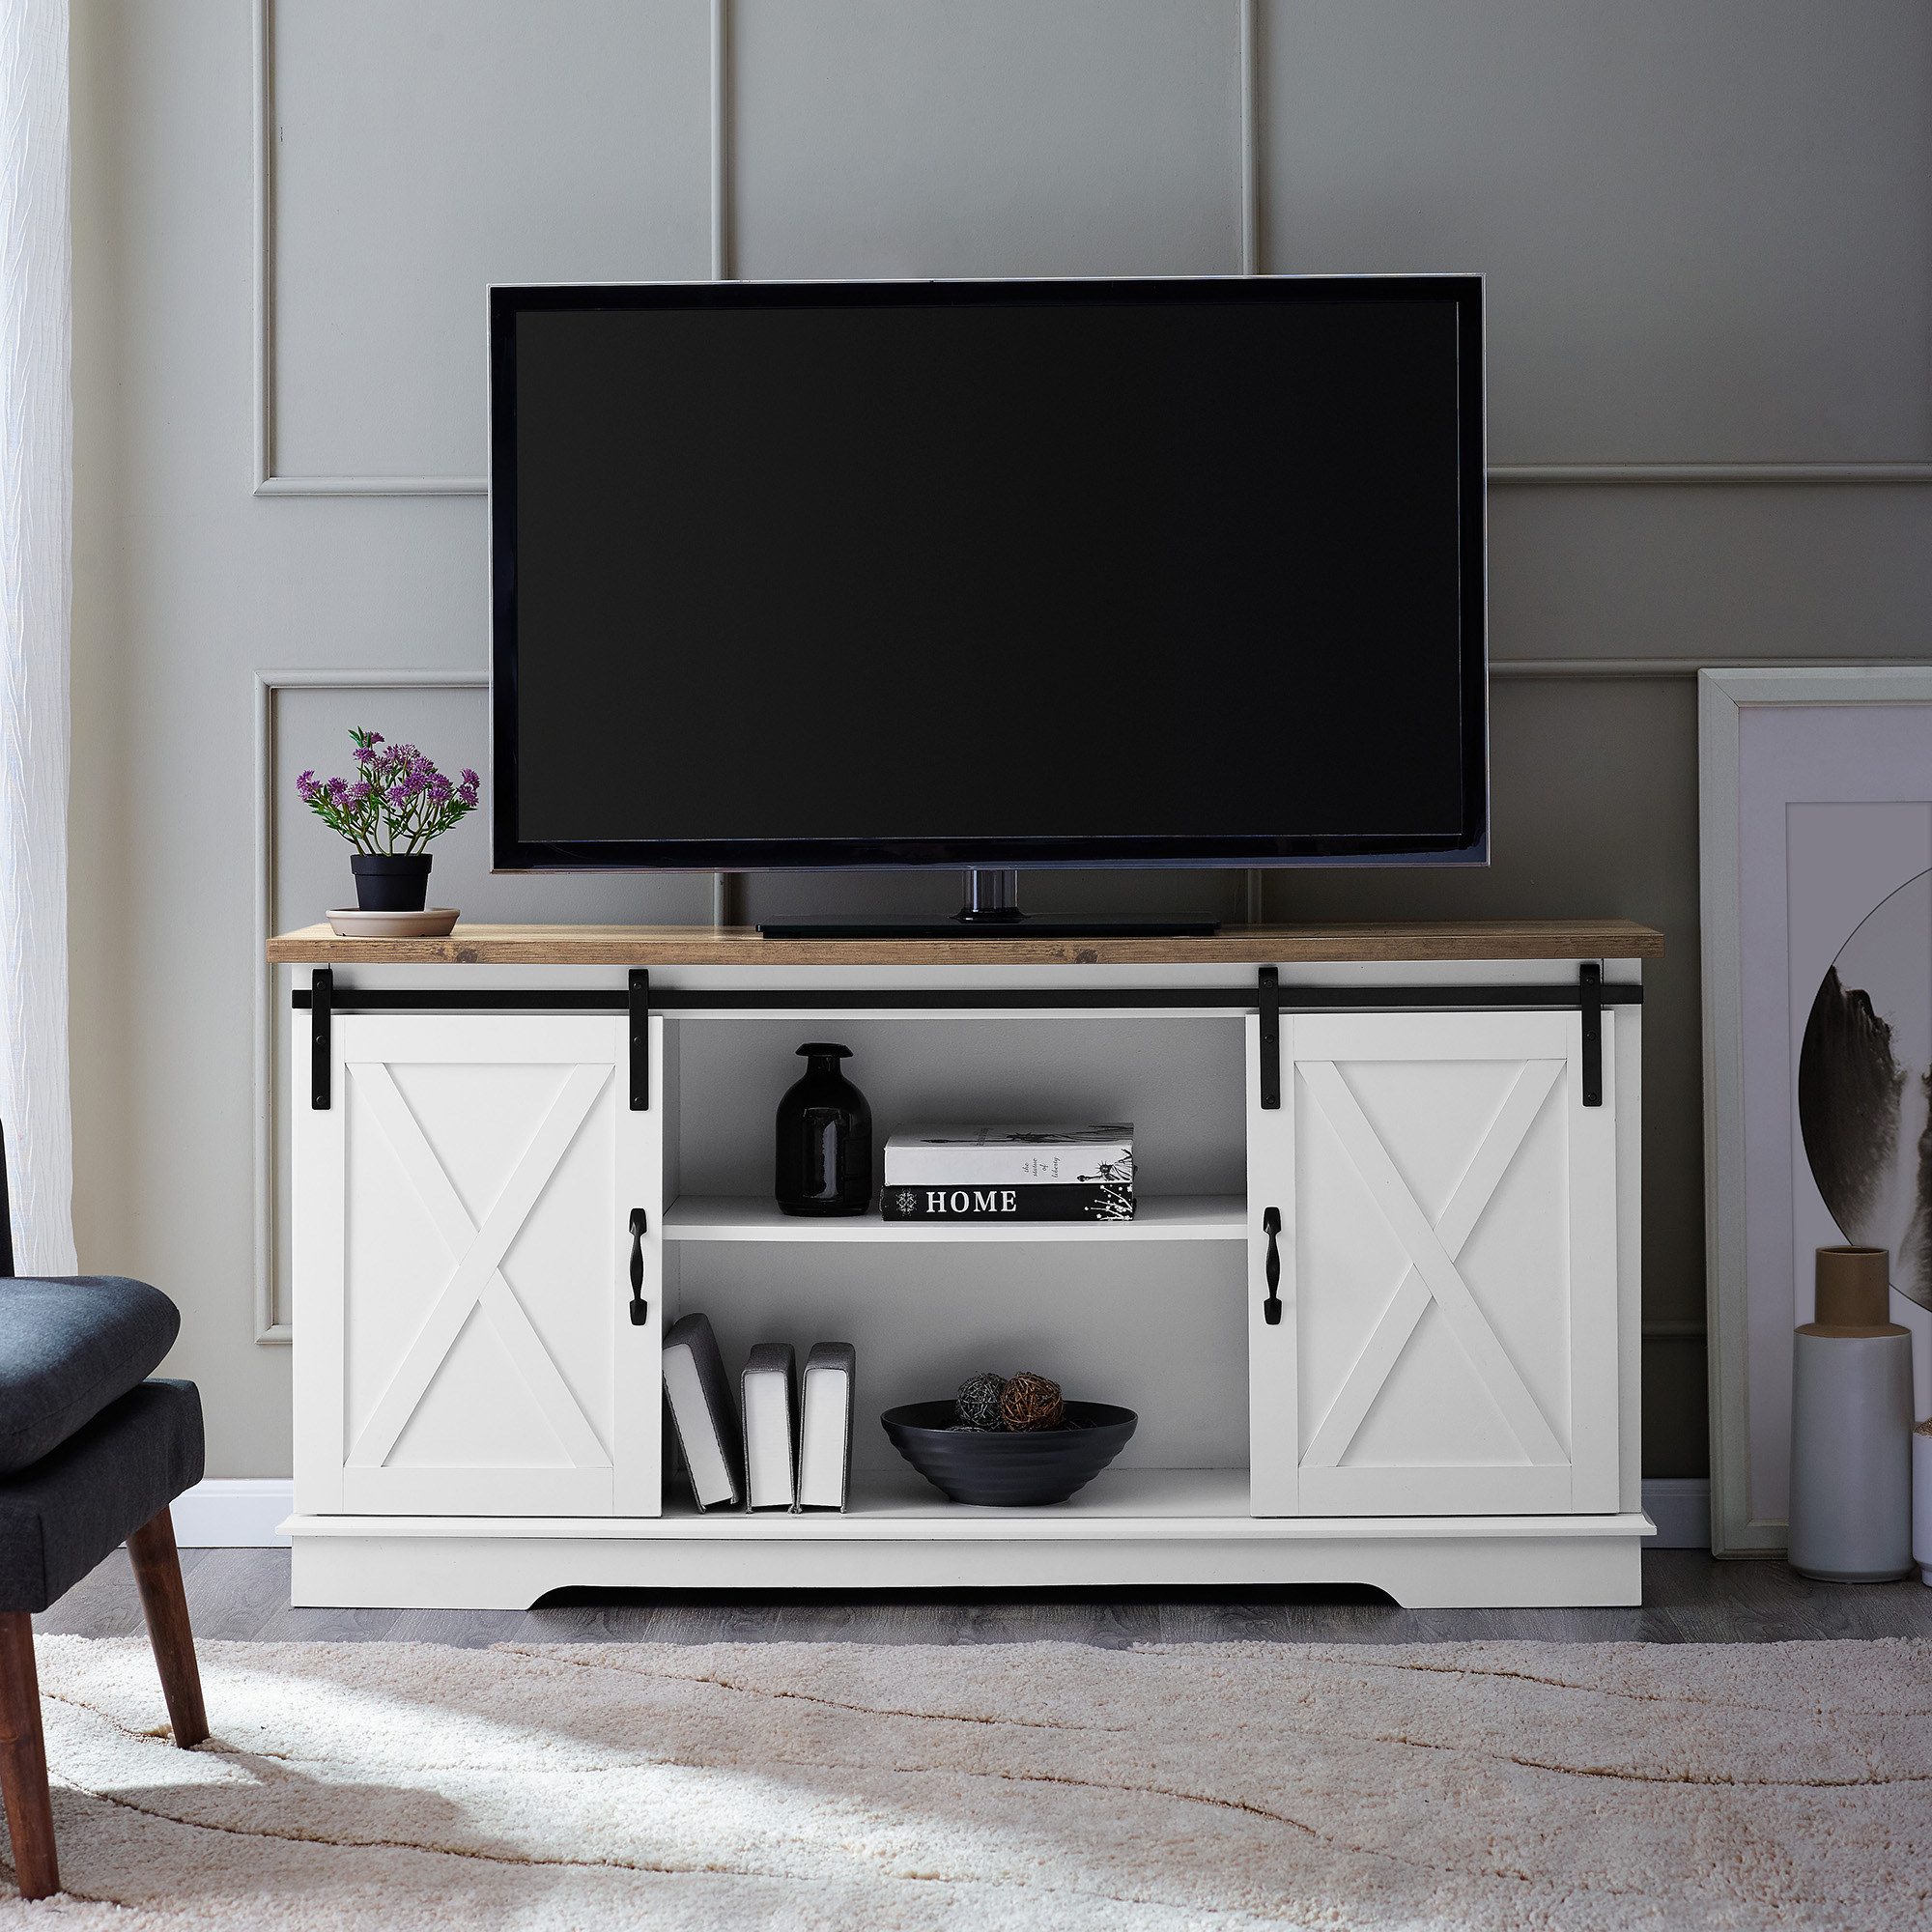 The TV stand, which has two open storage shelves in the center, and one closed cabinet shelf with handle on either side